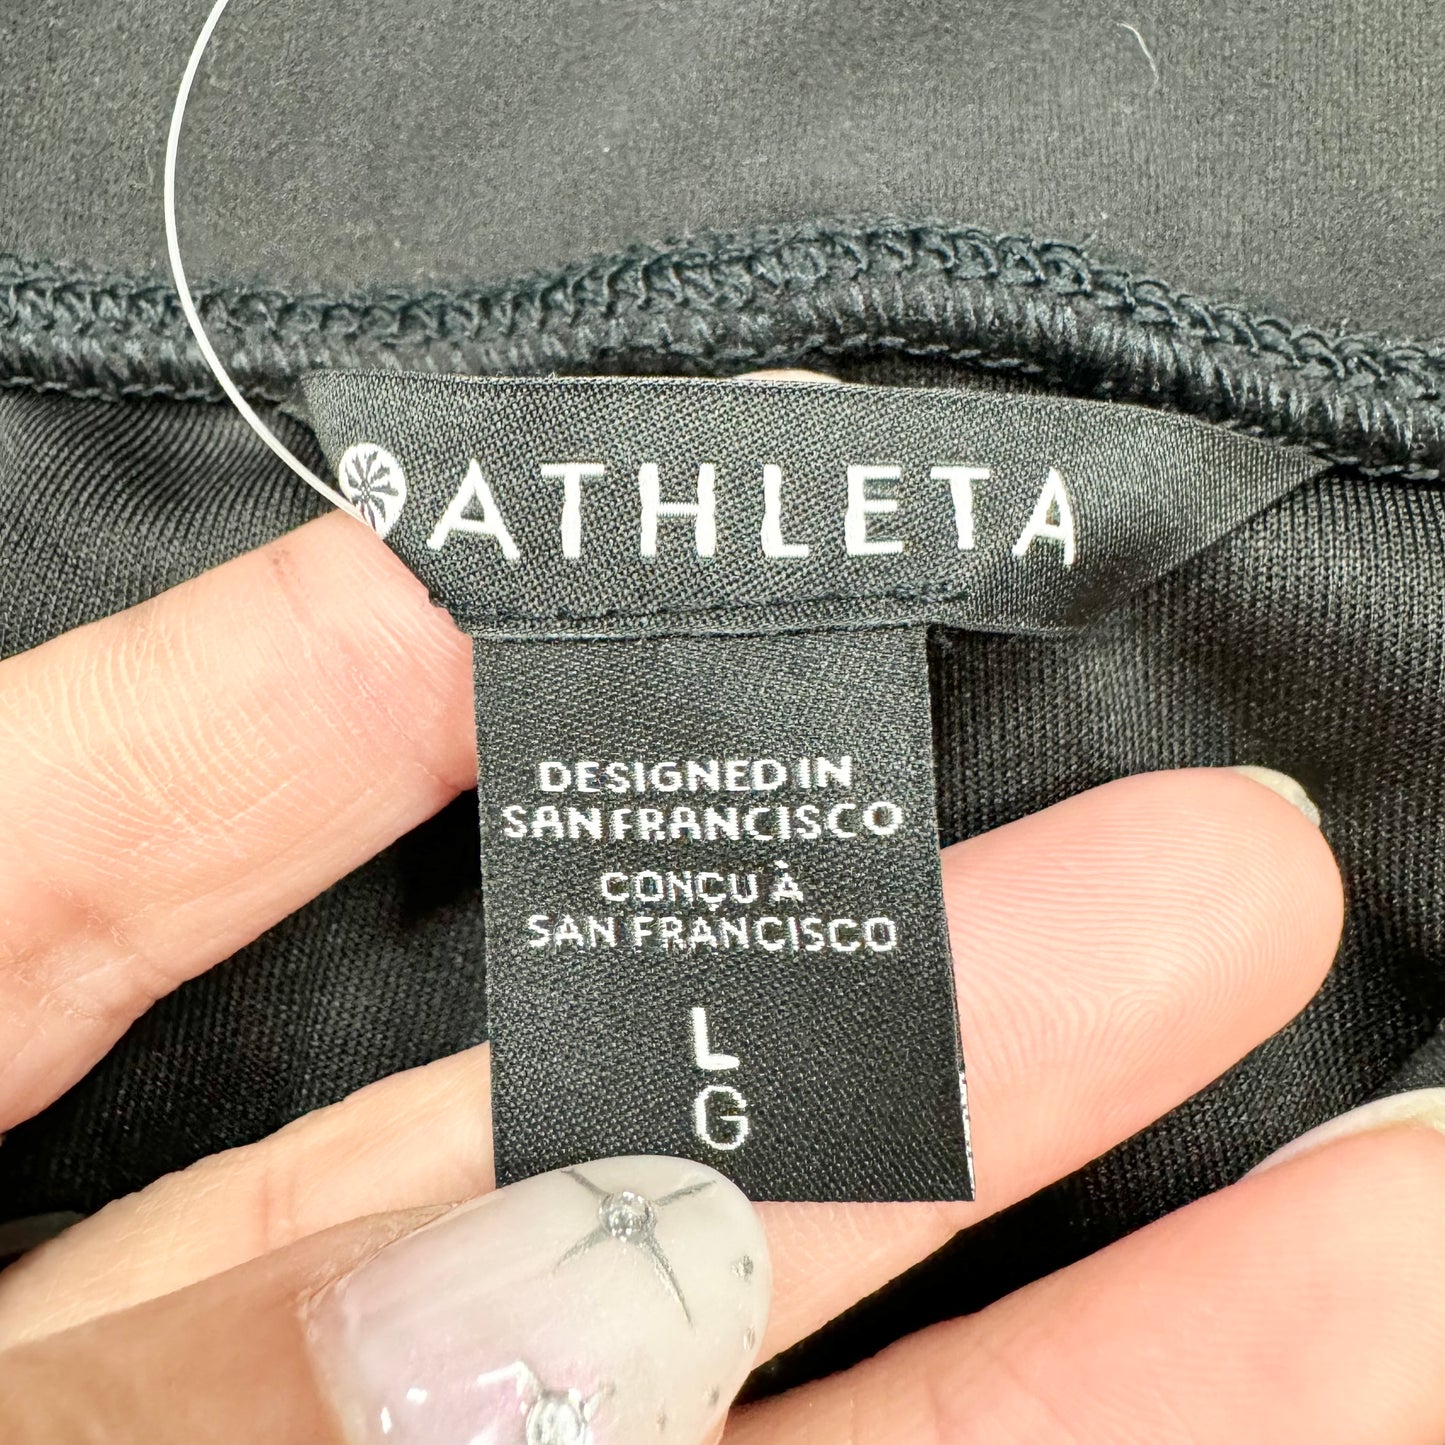 Athletic Pants By Athleta  Size: L